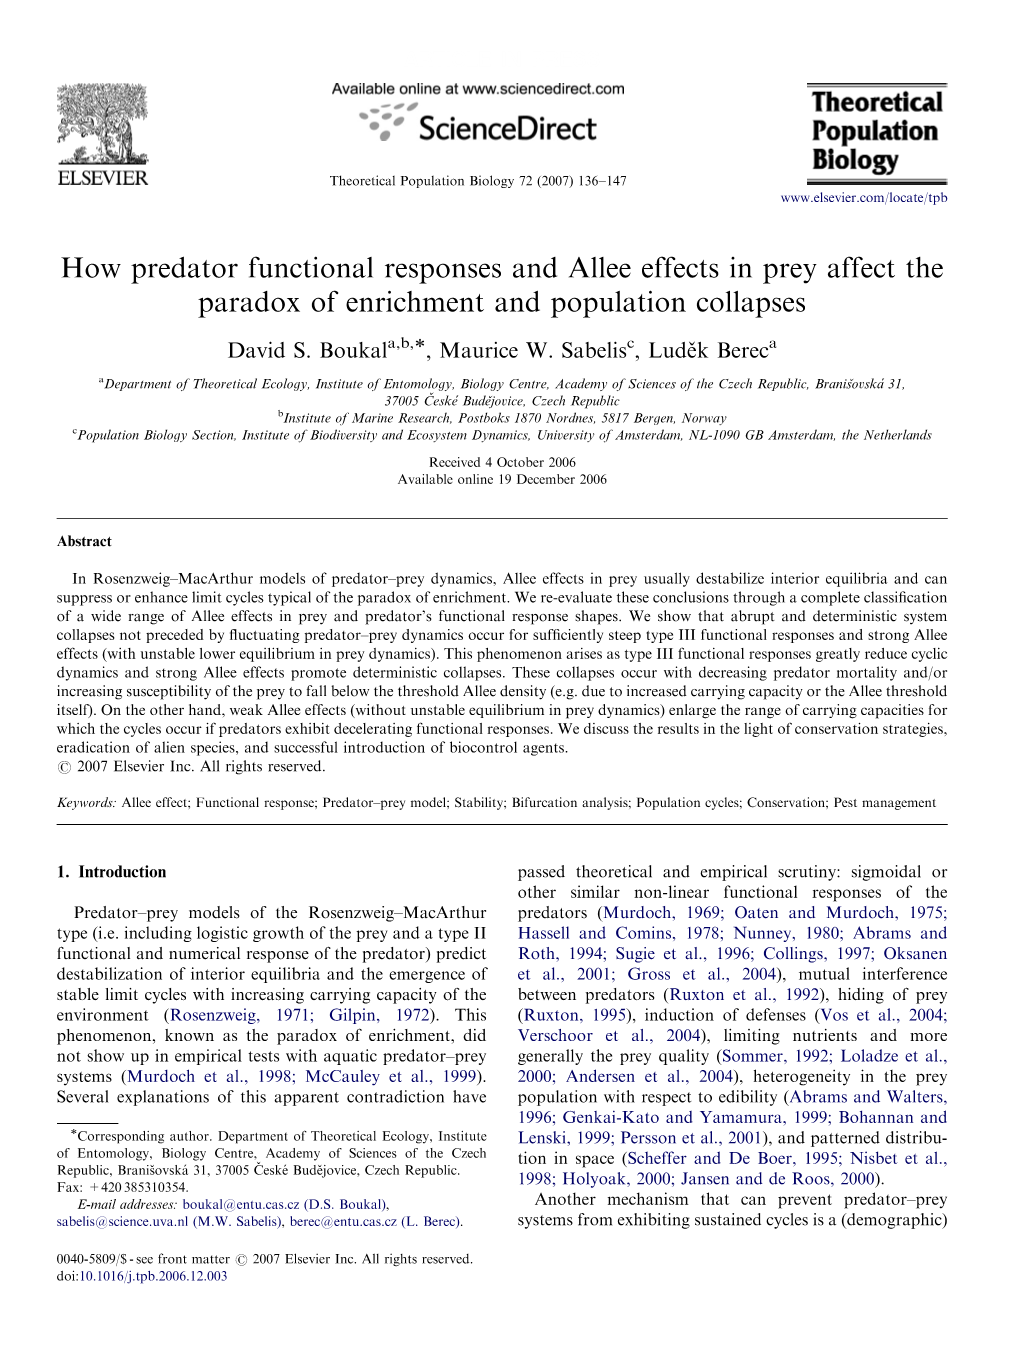 How Predator Functional Responses and Allee Effects in Prey Affect the Paradox of Enrichment and Population Collapses